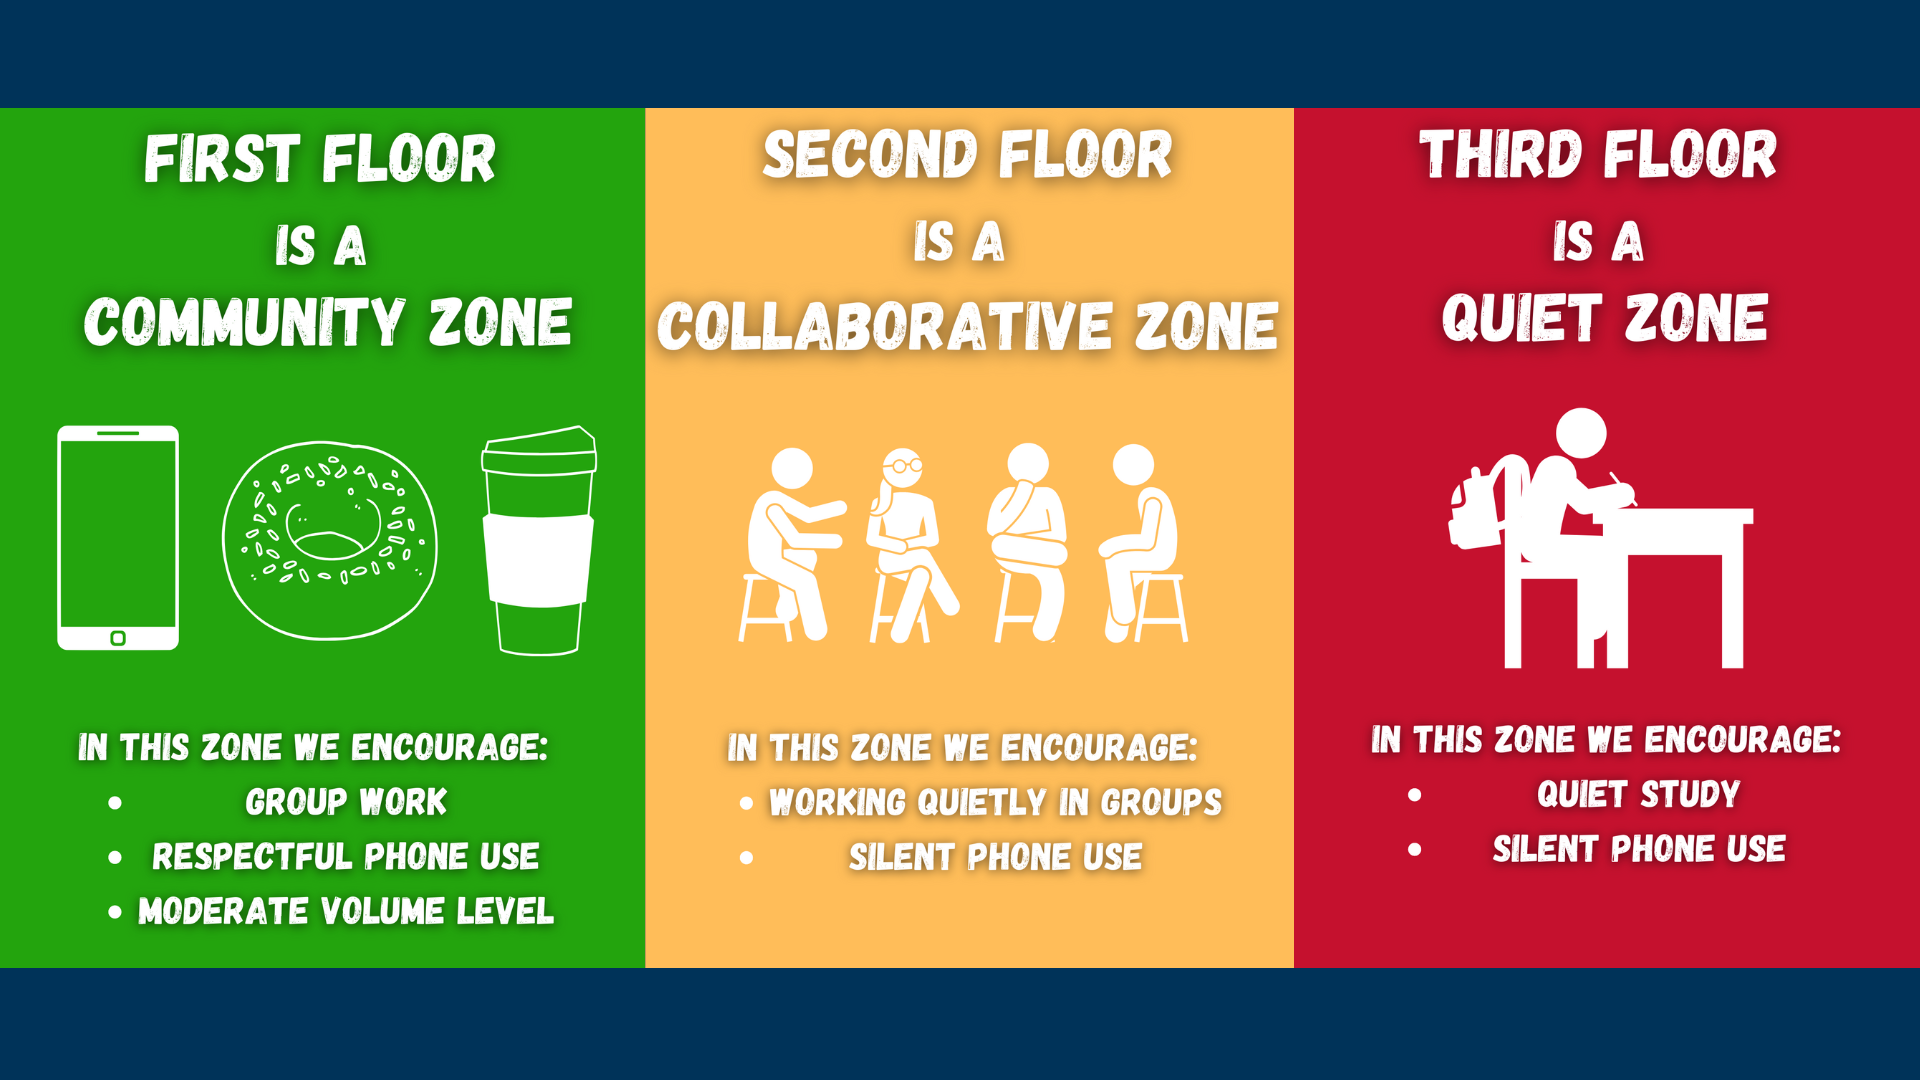 First floor is a community zone, second floor is a collaborative zone, third floor is a quiet zone.